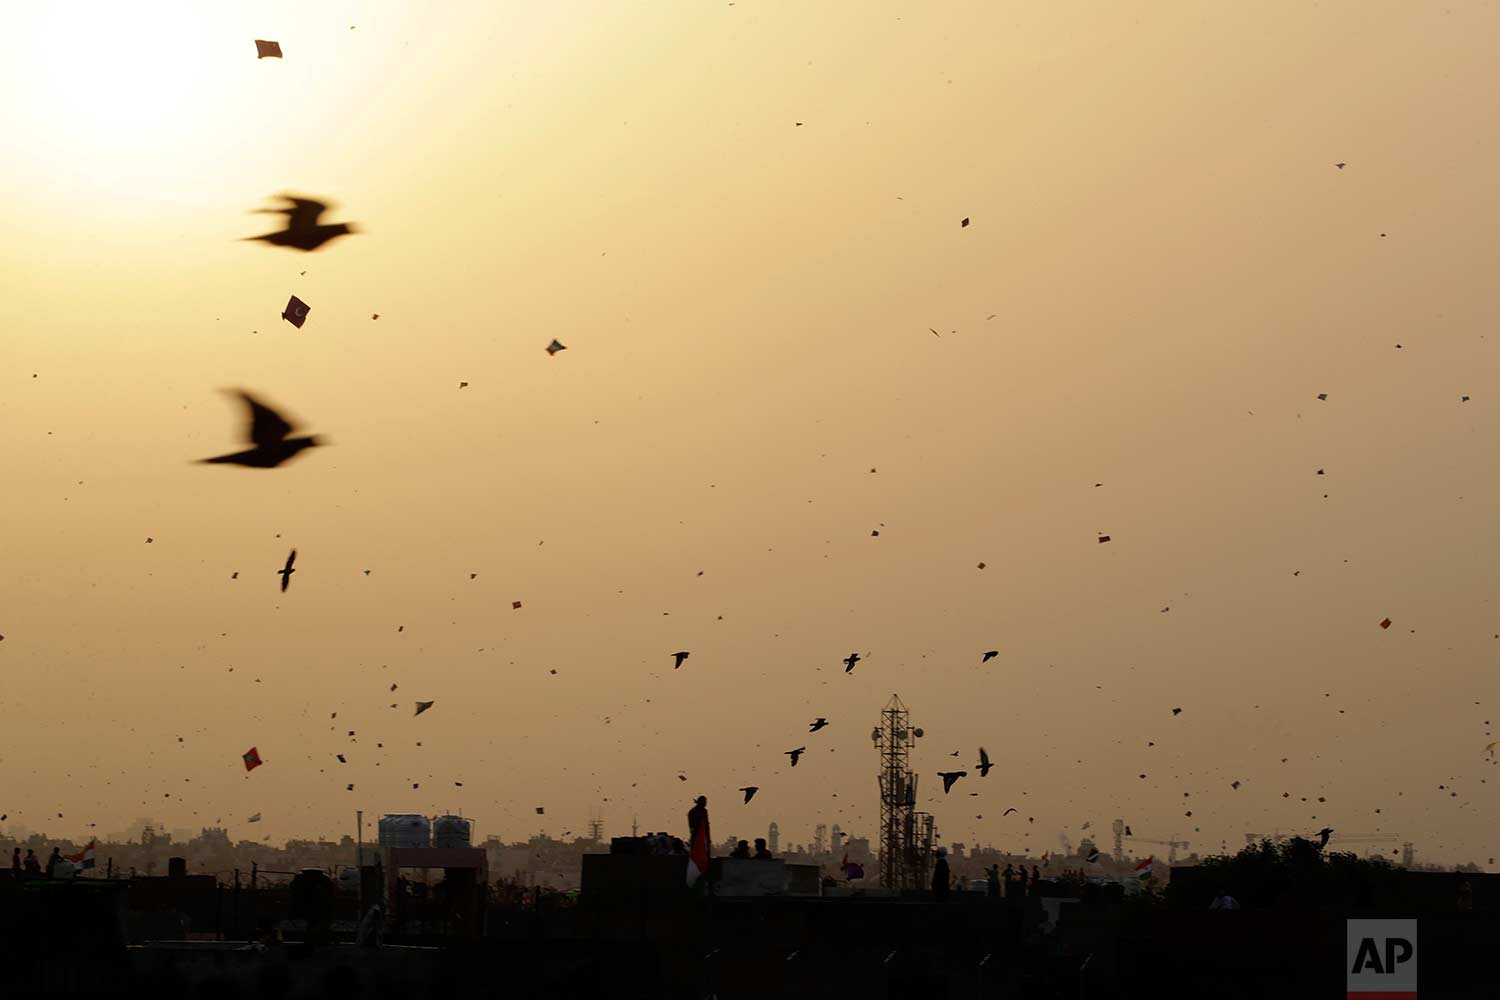  In this Tuesday, Aug. 15, 2017 photo, birds fly among kites on Independence Day in the old quarters of New Delhi, India. (AP Photo/Tsering Topgyal) 